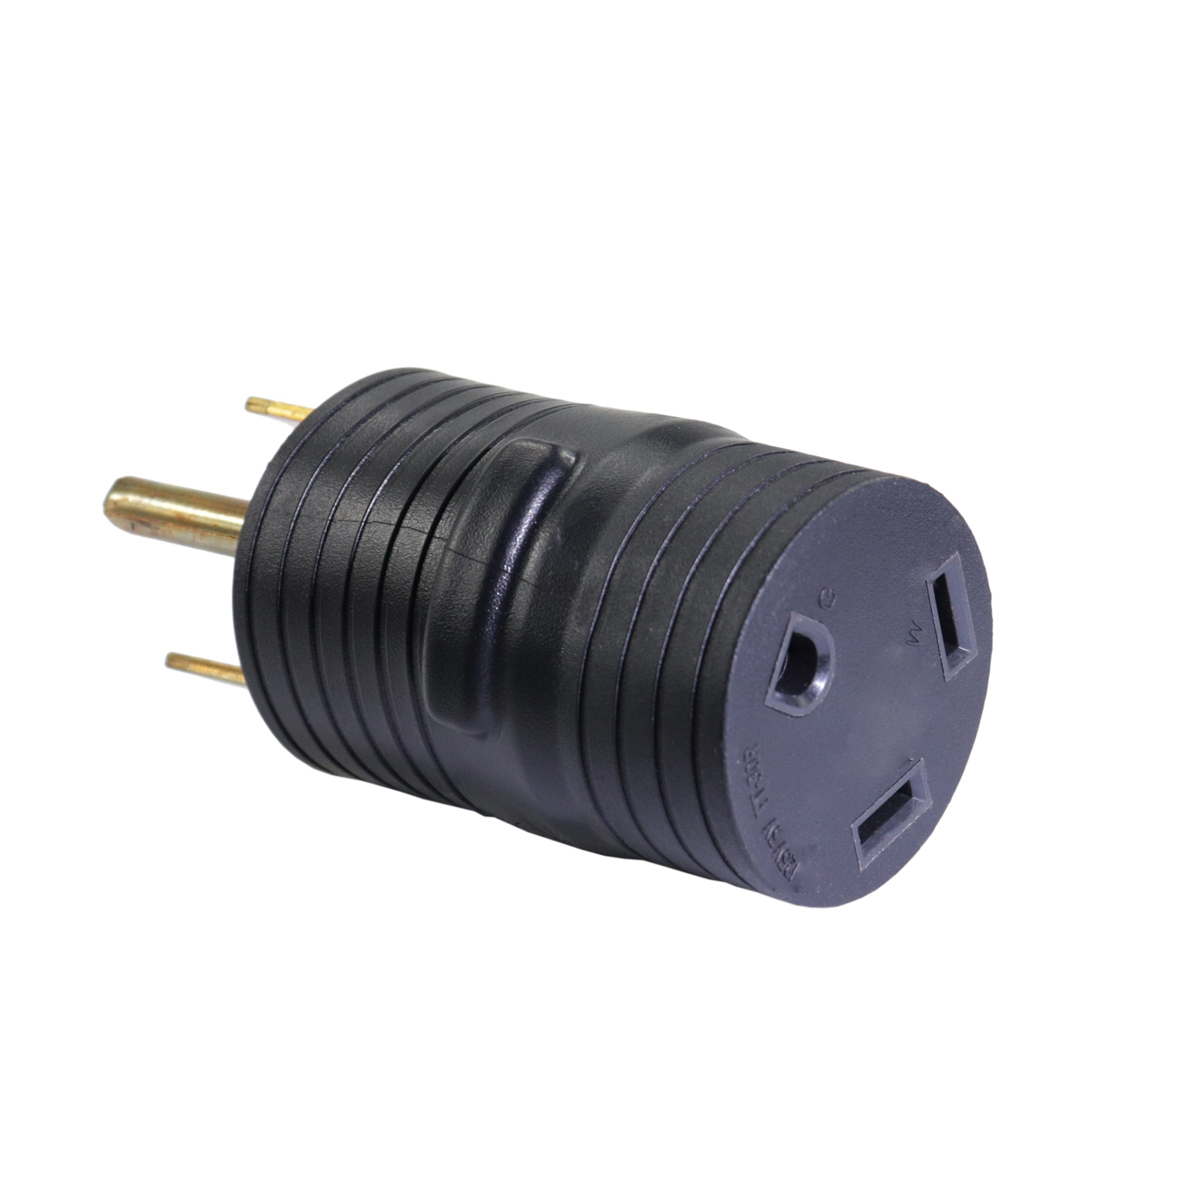 RV-Electrical-Locking-Adapter-50A-Male-to-30A-Female-Locking-Plug-Connector-1403285-7